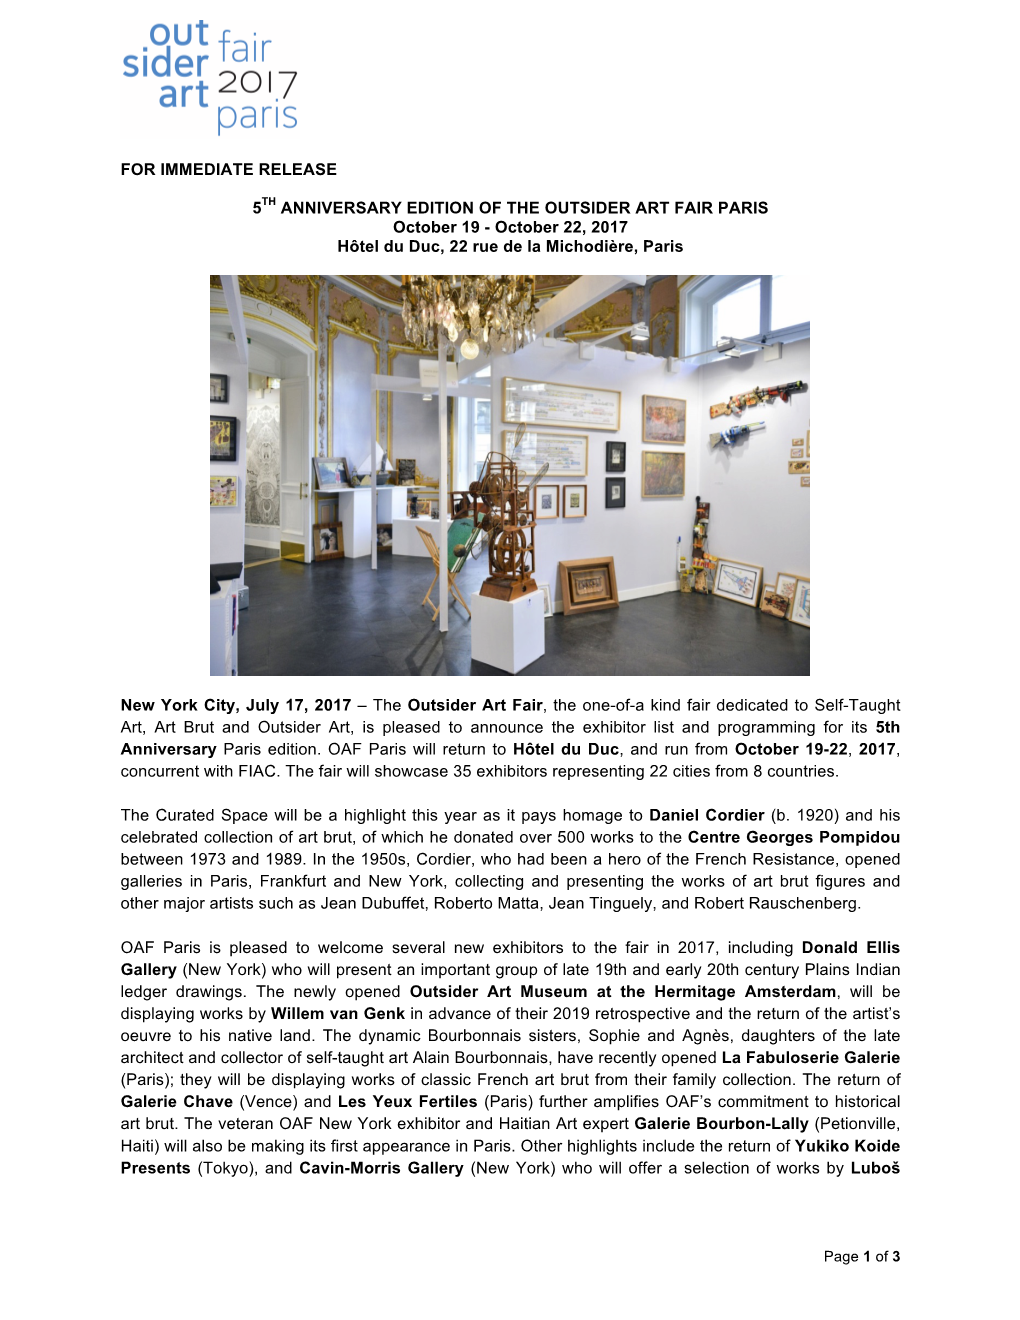 FOR IMMEDIATE RELEASE 5TH ANNIVERSARY EDITION of the OUTSIDER ART FAIR PARIS October 19